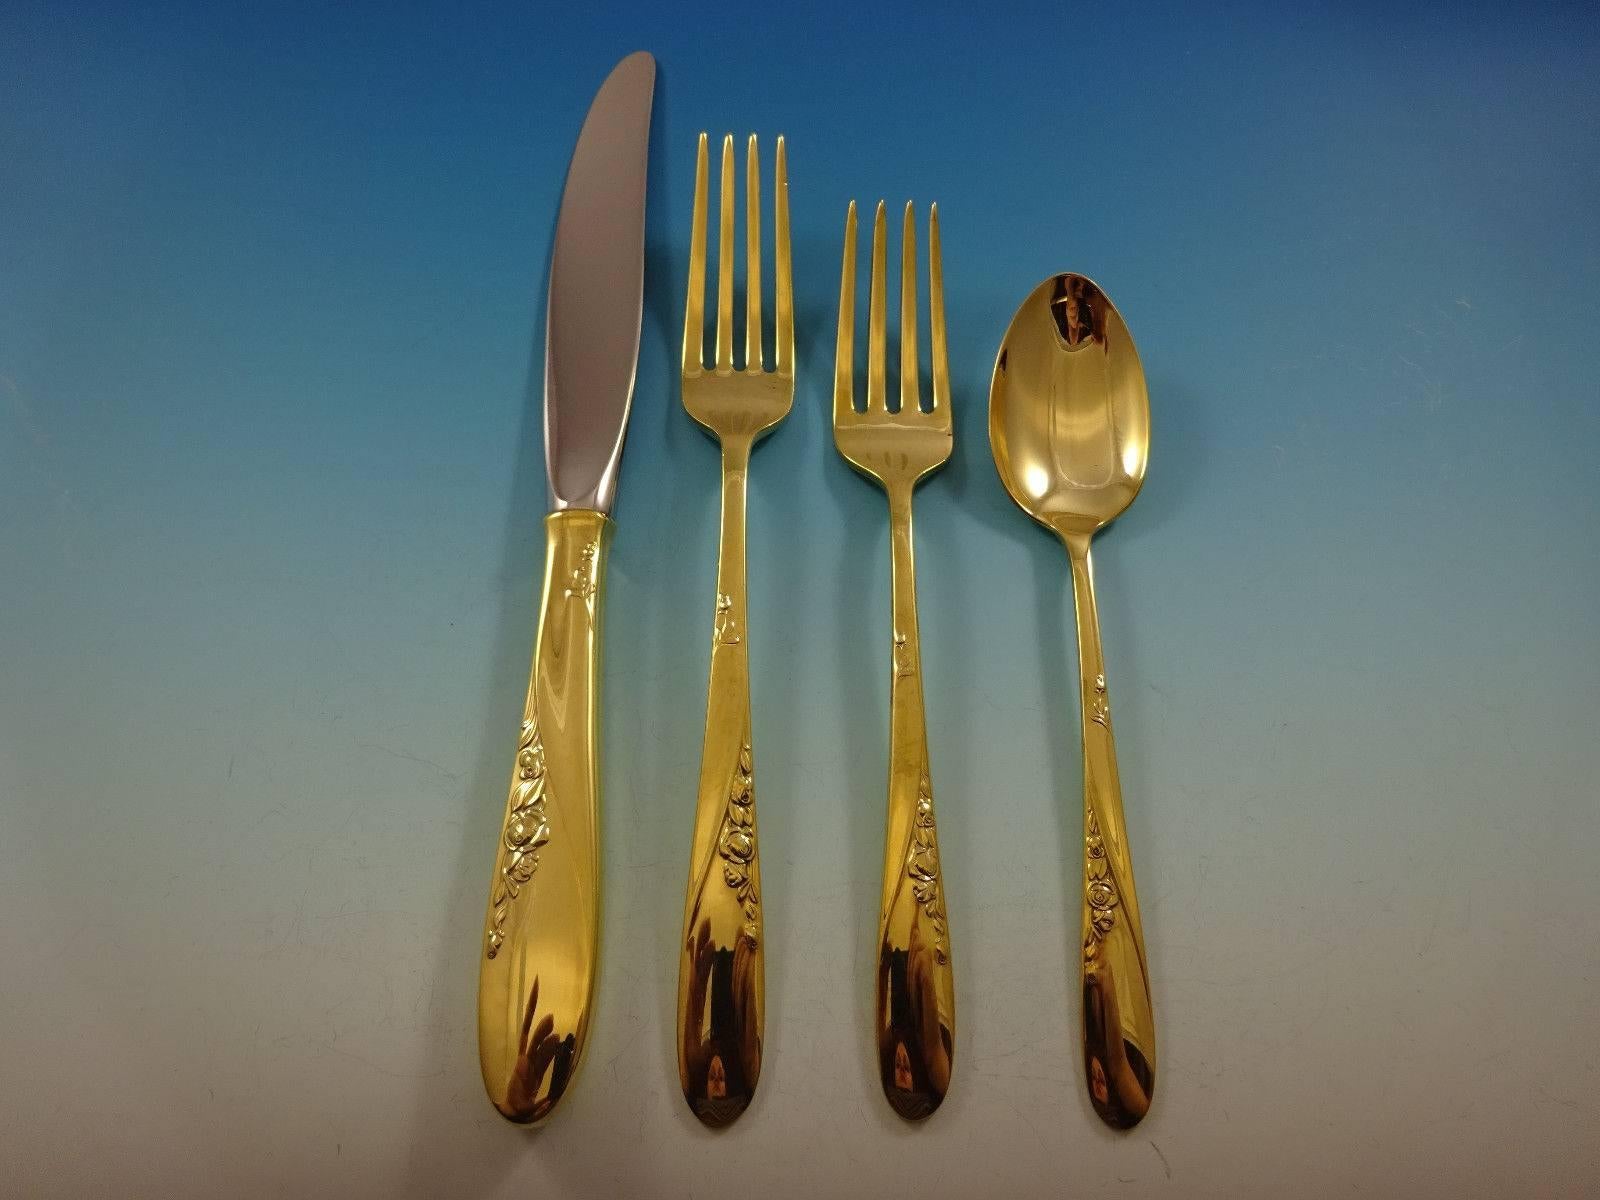 Rose spray gold by Easterling sterling silver flatware set, 48 pieces. Gold flatware is on trend and makes a bold statement on your table. This set is vermeil (completely gold-washed) and includes:

12 knives, 8 7/8